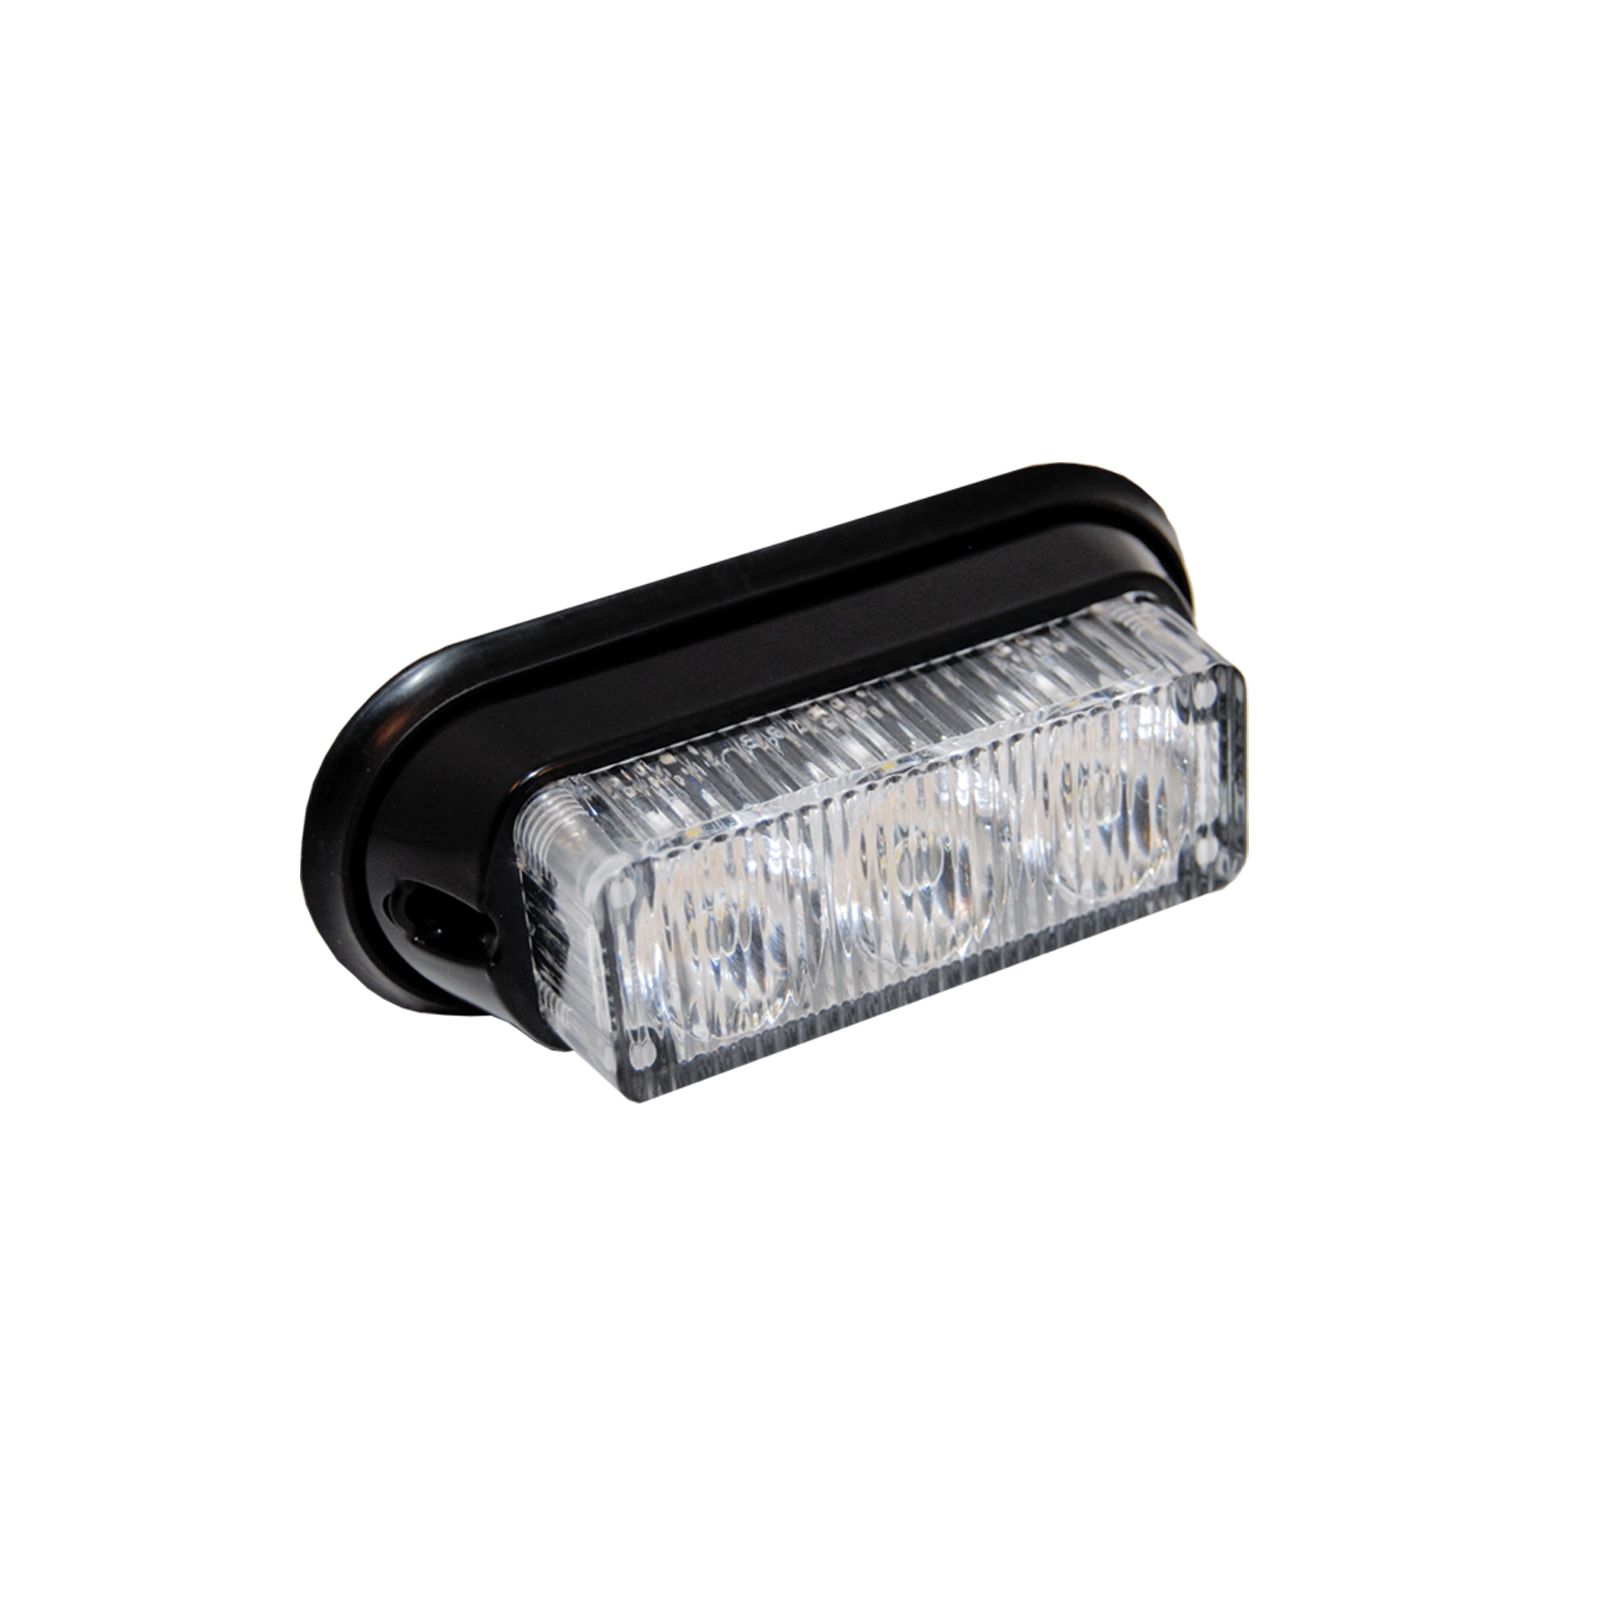 Picture of Oracle Lighting 3401-002 3 Led Undercover Strobe Light, Blue